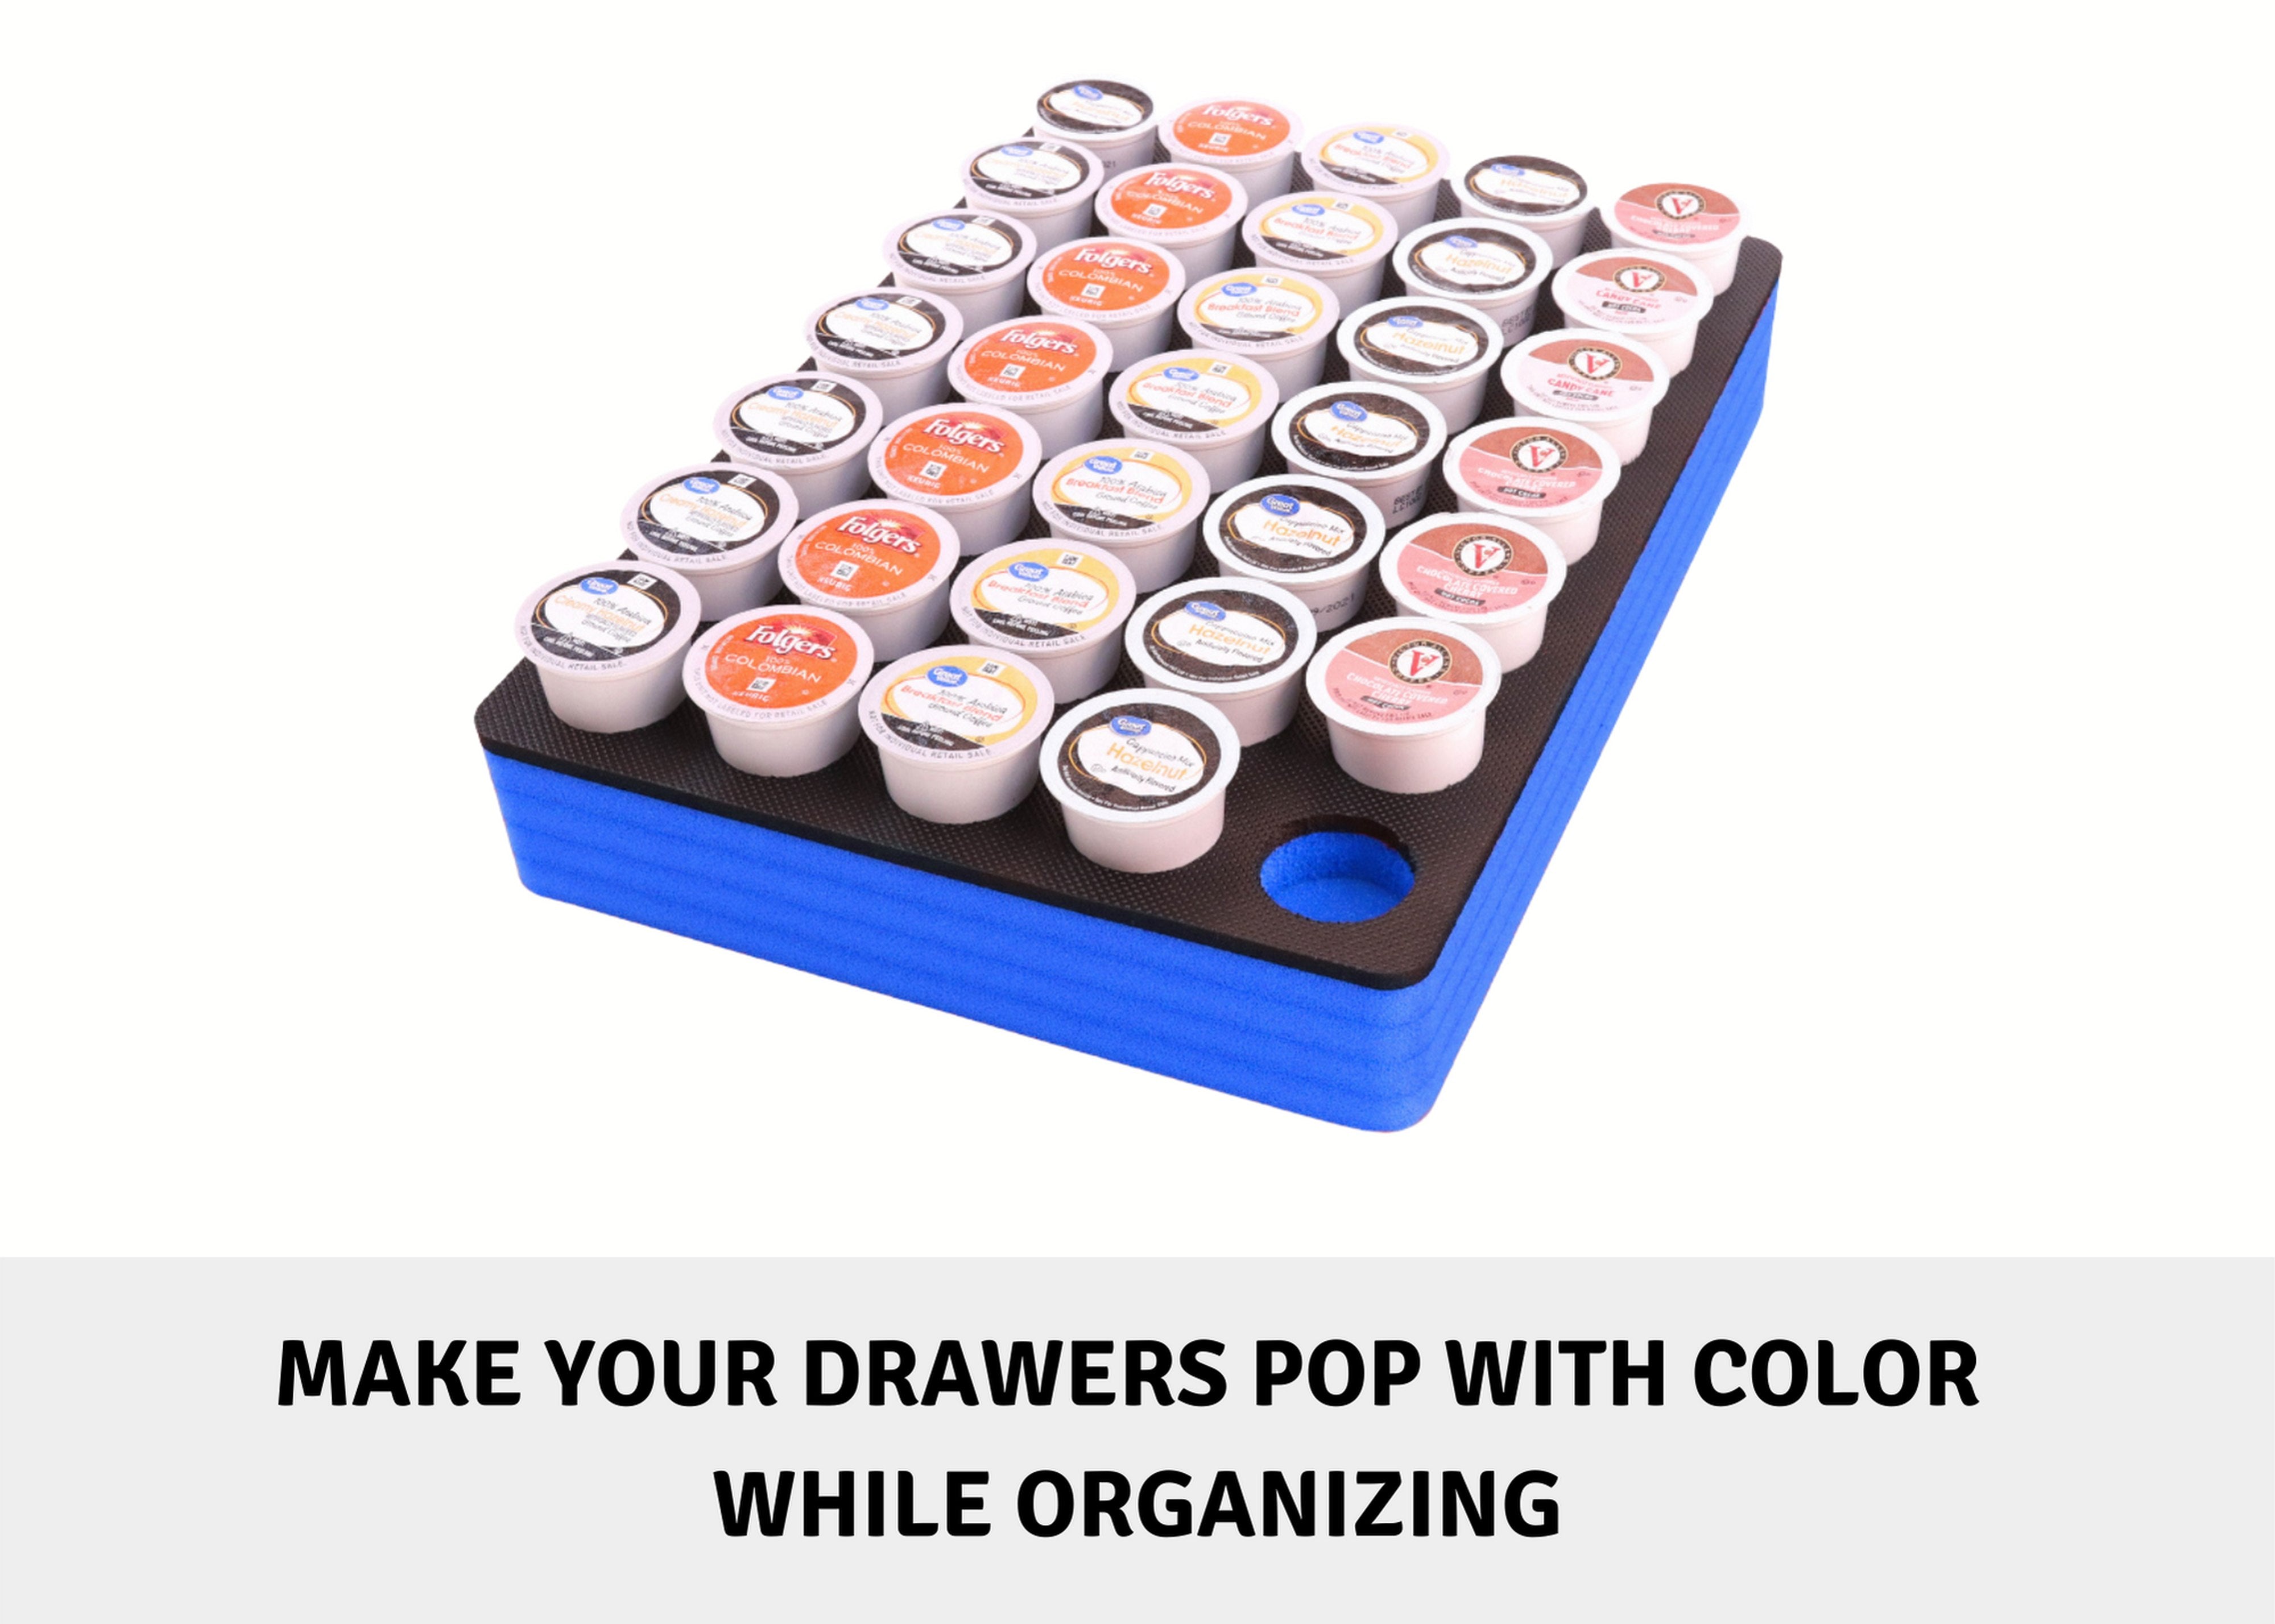 Coffee Pod Storage Deluxe Organizer Tray Drawer Insert for Kitchen Home Office Waterproof 11.9 X 15.9 Inches Holds 35 Compatible Keurig K-Cup